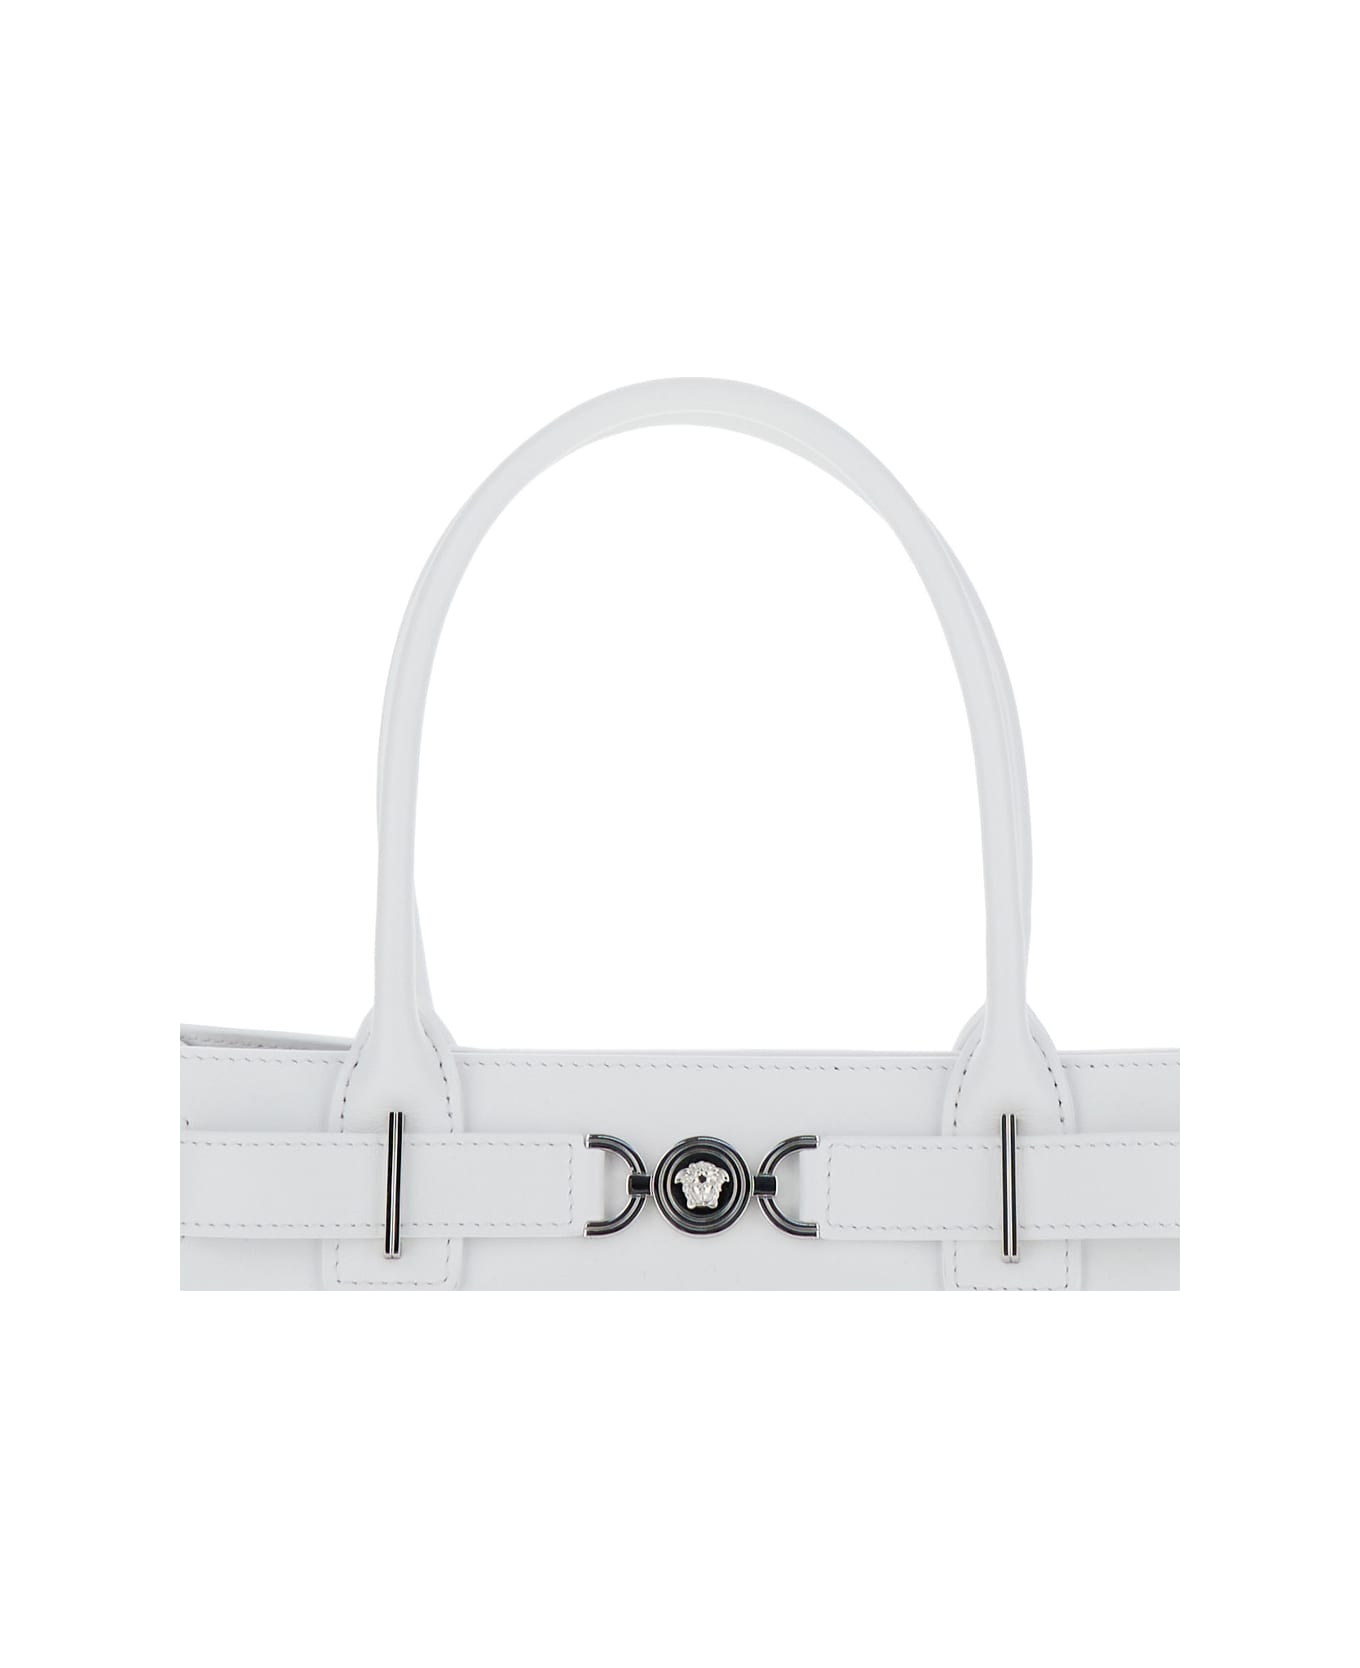 Versace Large Tote Look1 - White